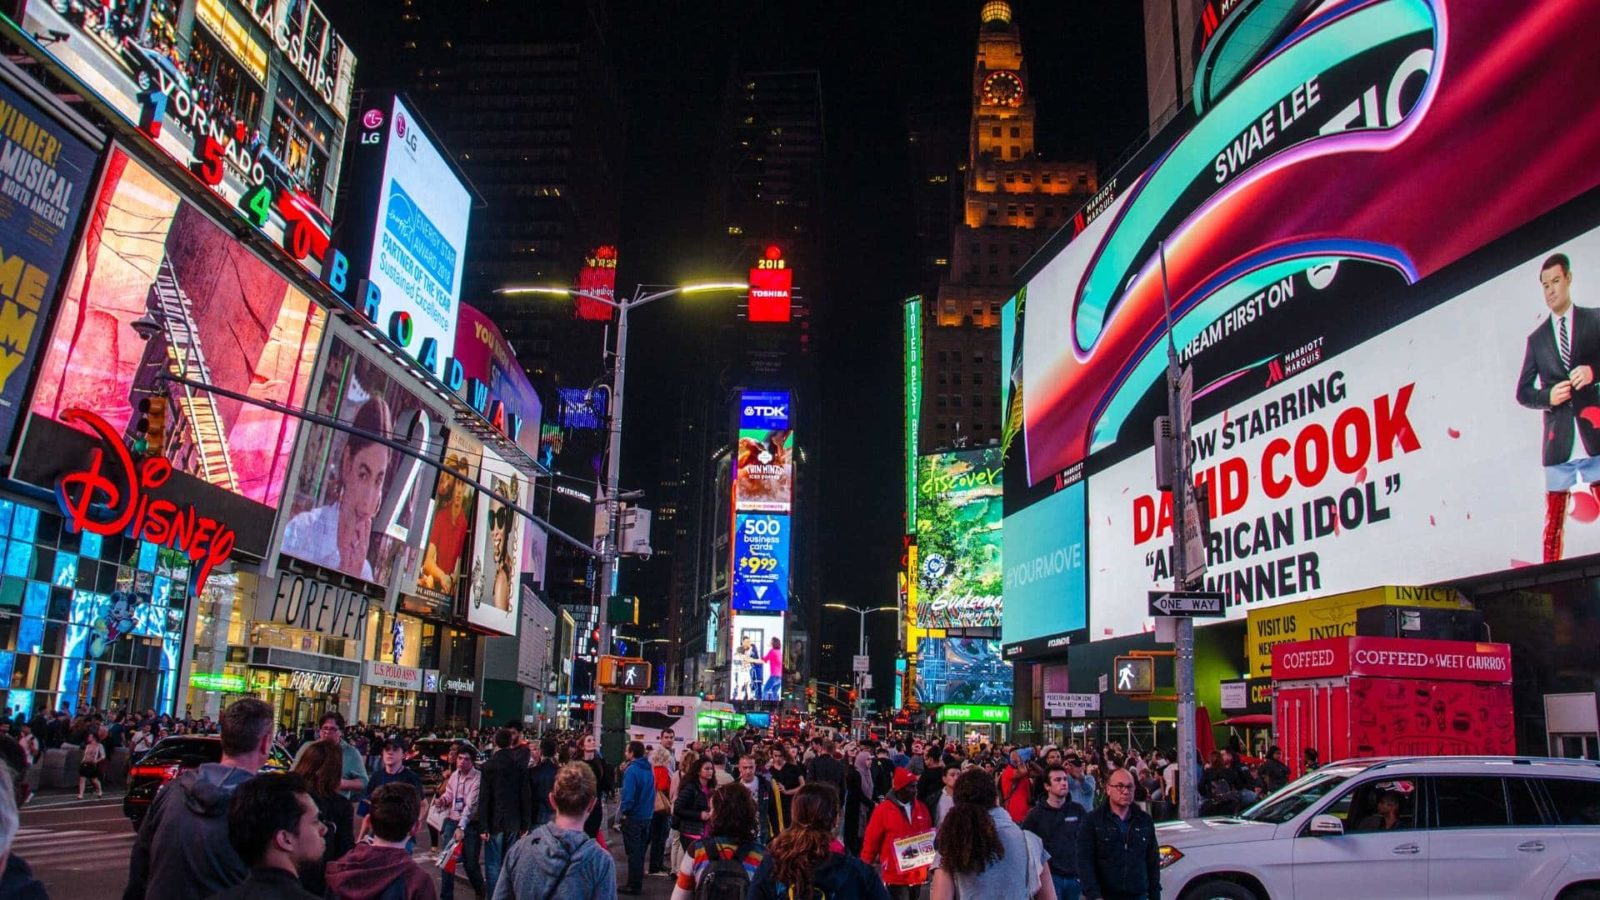 How to Get Cheap Broadway Tickets Last Minute